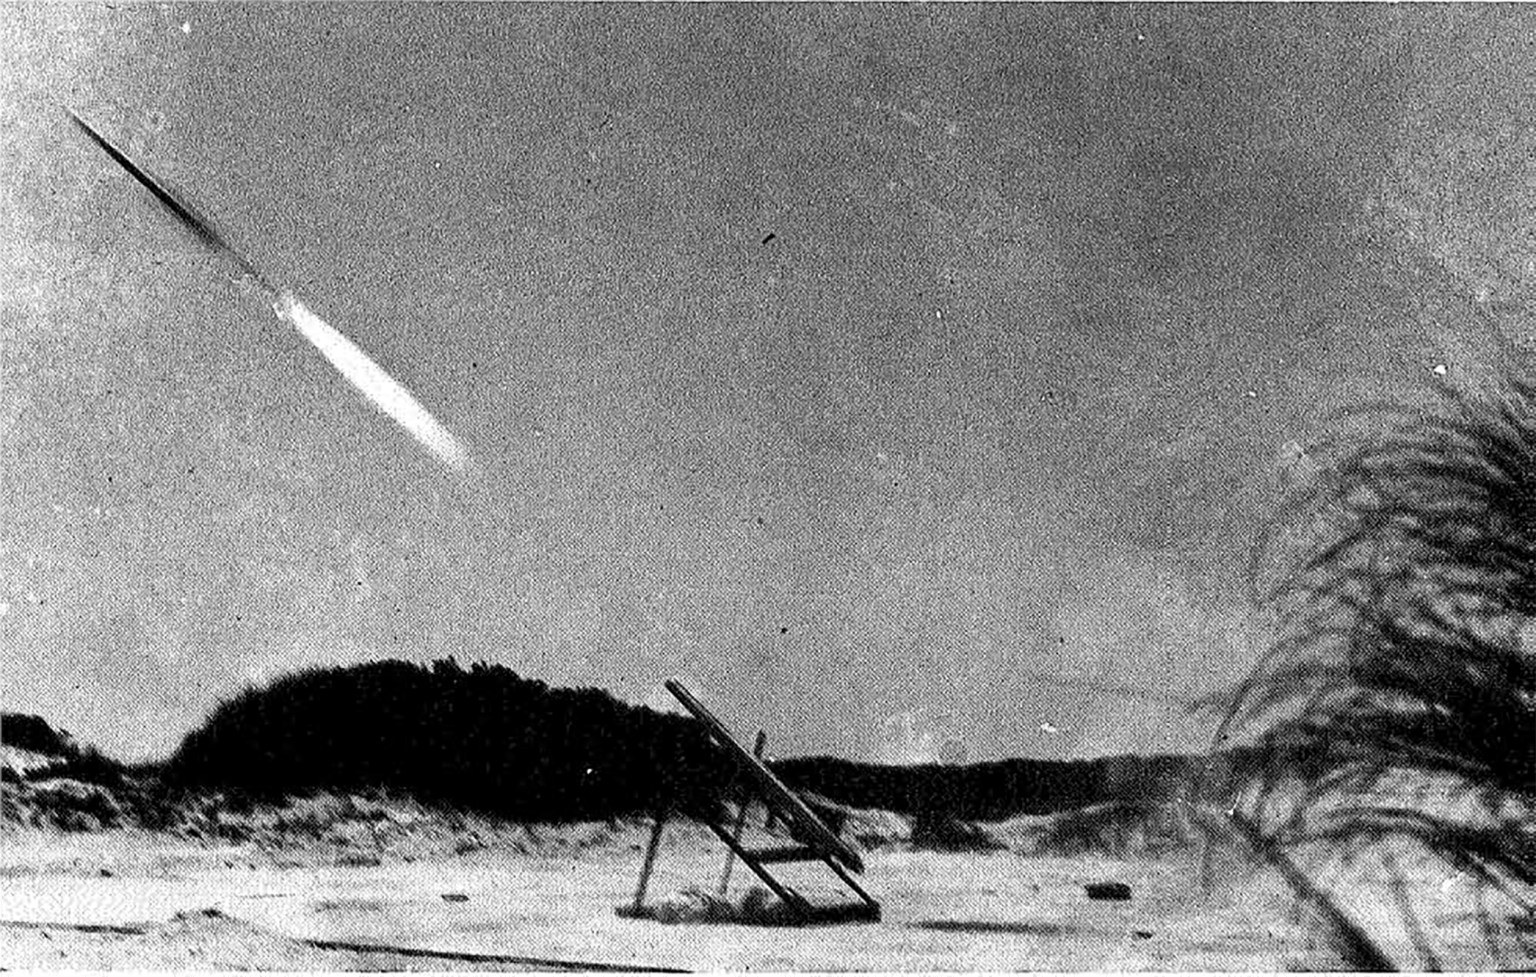 A black and white image of a small rocket taking off from a stand on a beach. The rocket is blurry, launching into the left side of the image with a small white flame behind it. A small stand is in the center of the image, with some vegetation behind it.